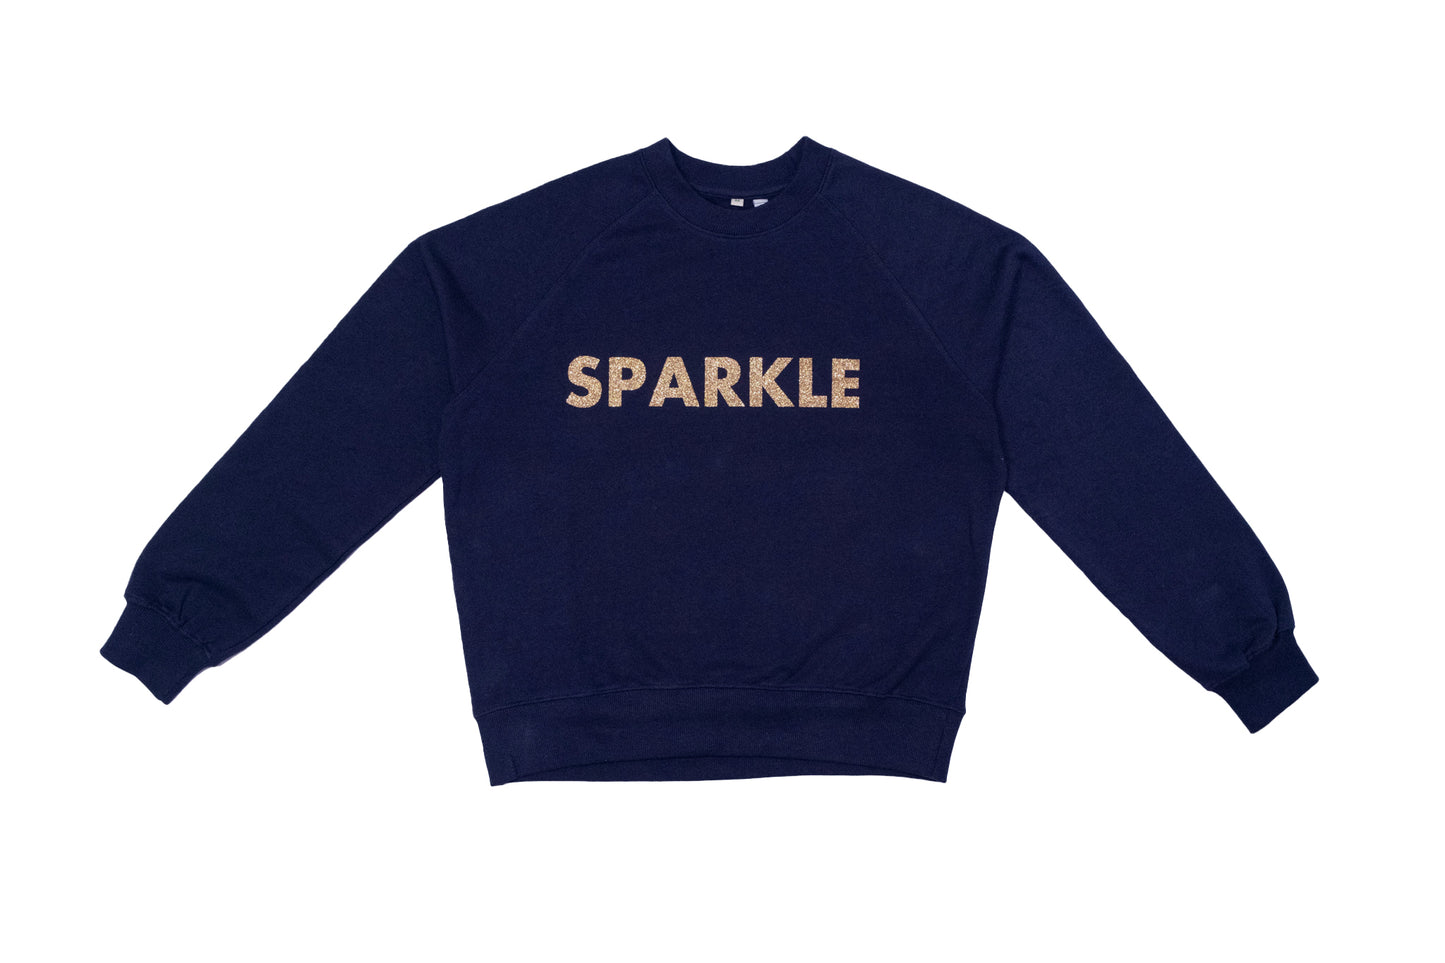 Lola SPARKLE Sweatshirt Relaxed Fit Dropped Shoulders